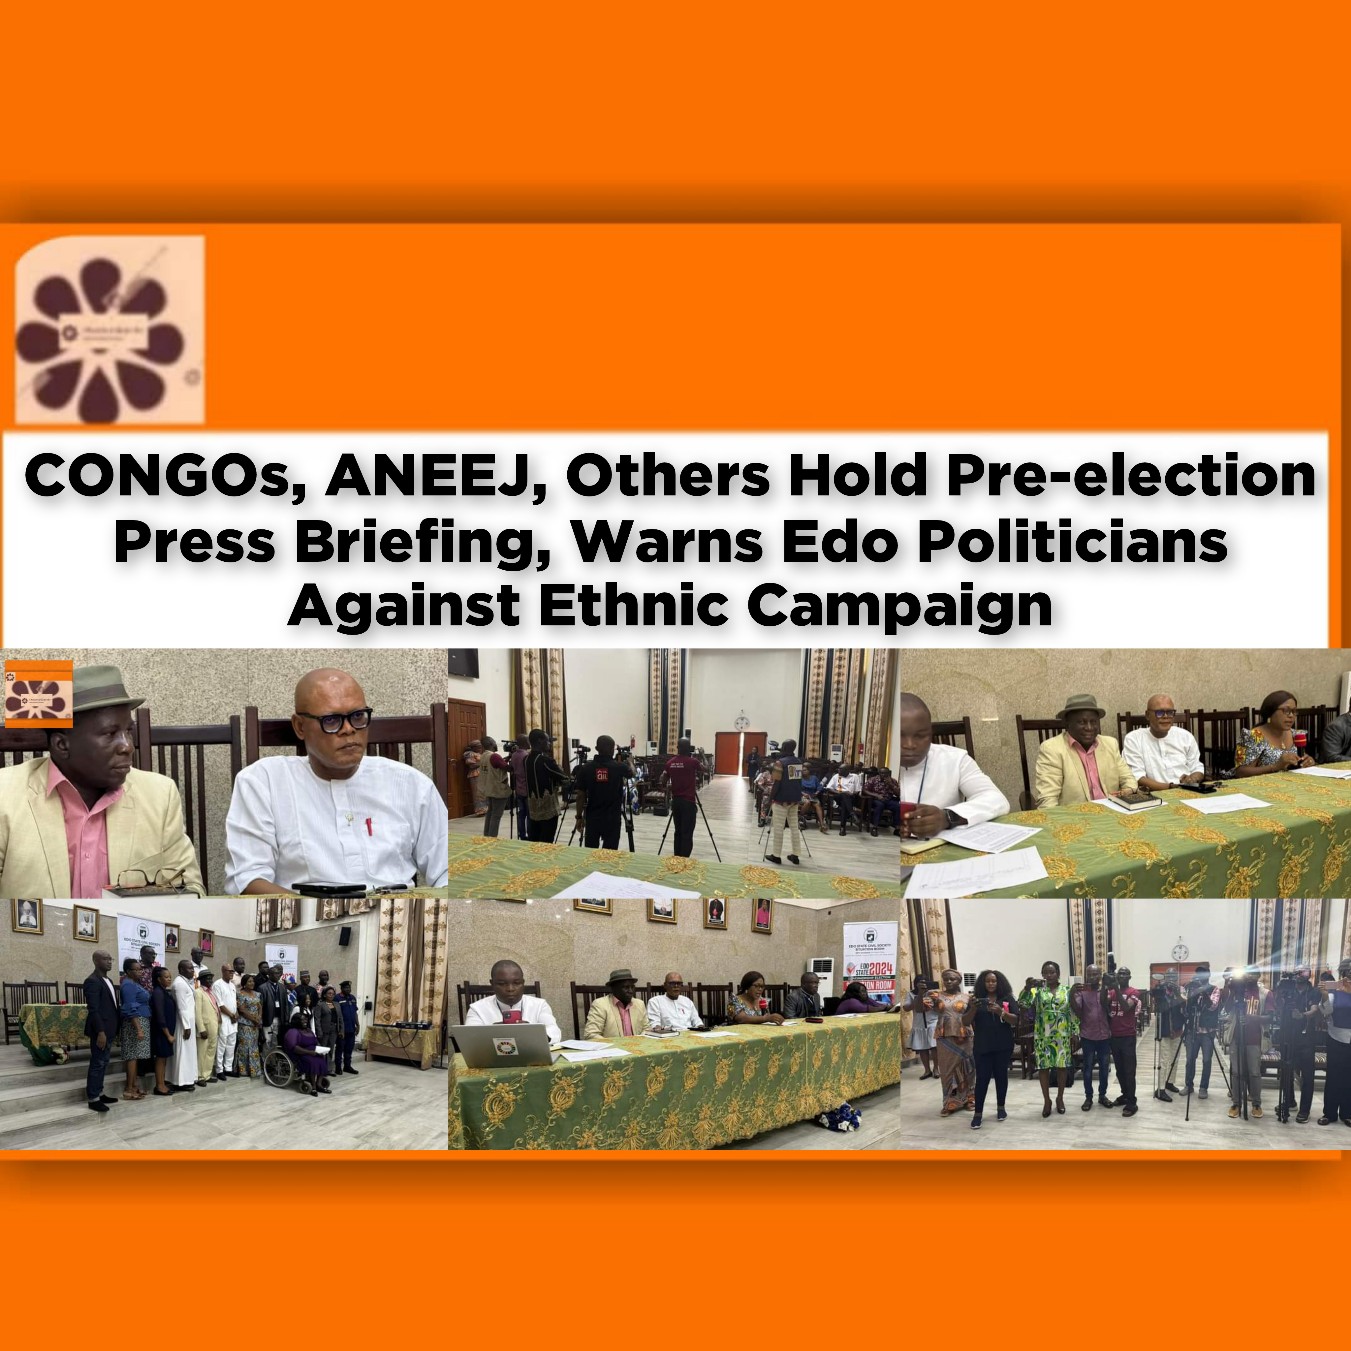 CONGOs, ANEEJ, Others Hold Pre-election Press Briefing, Warns Edo Politicians Against Ethnic Campaign ~ OsazuwaAkonedo #North